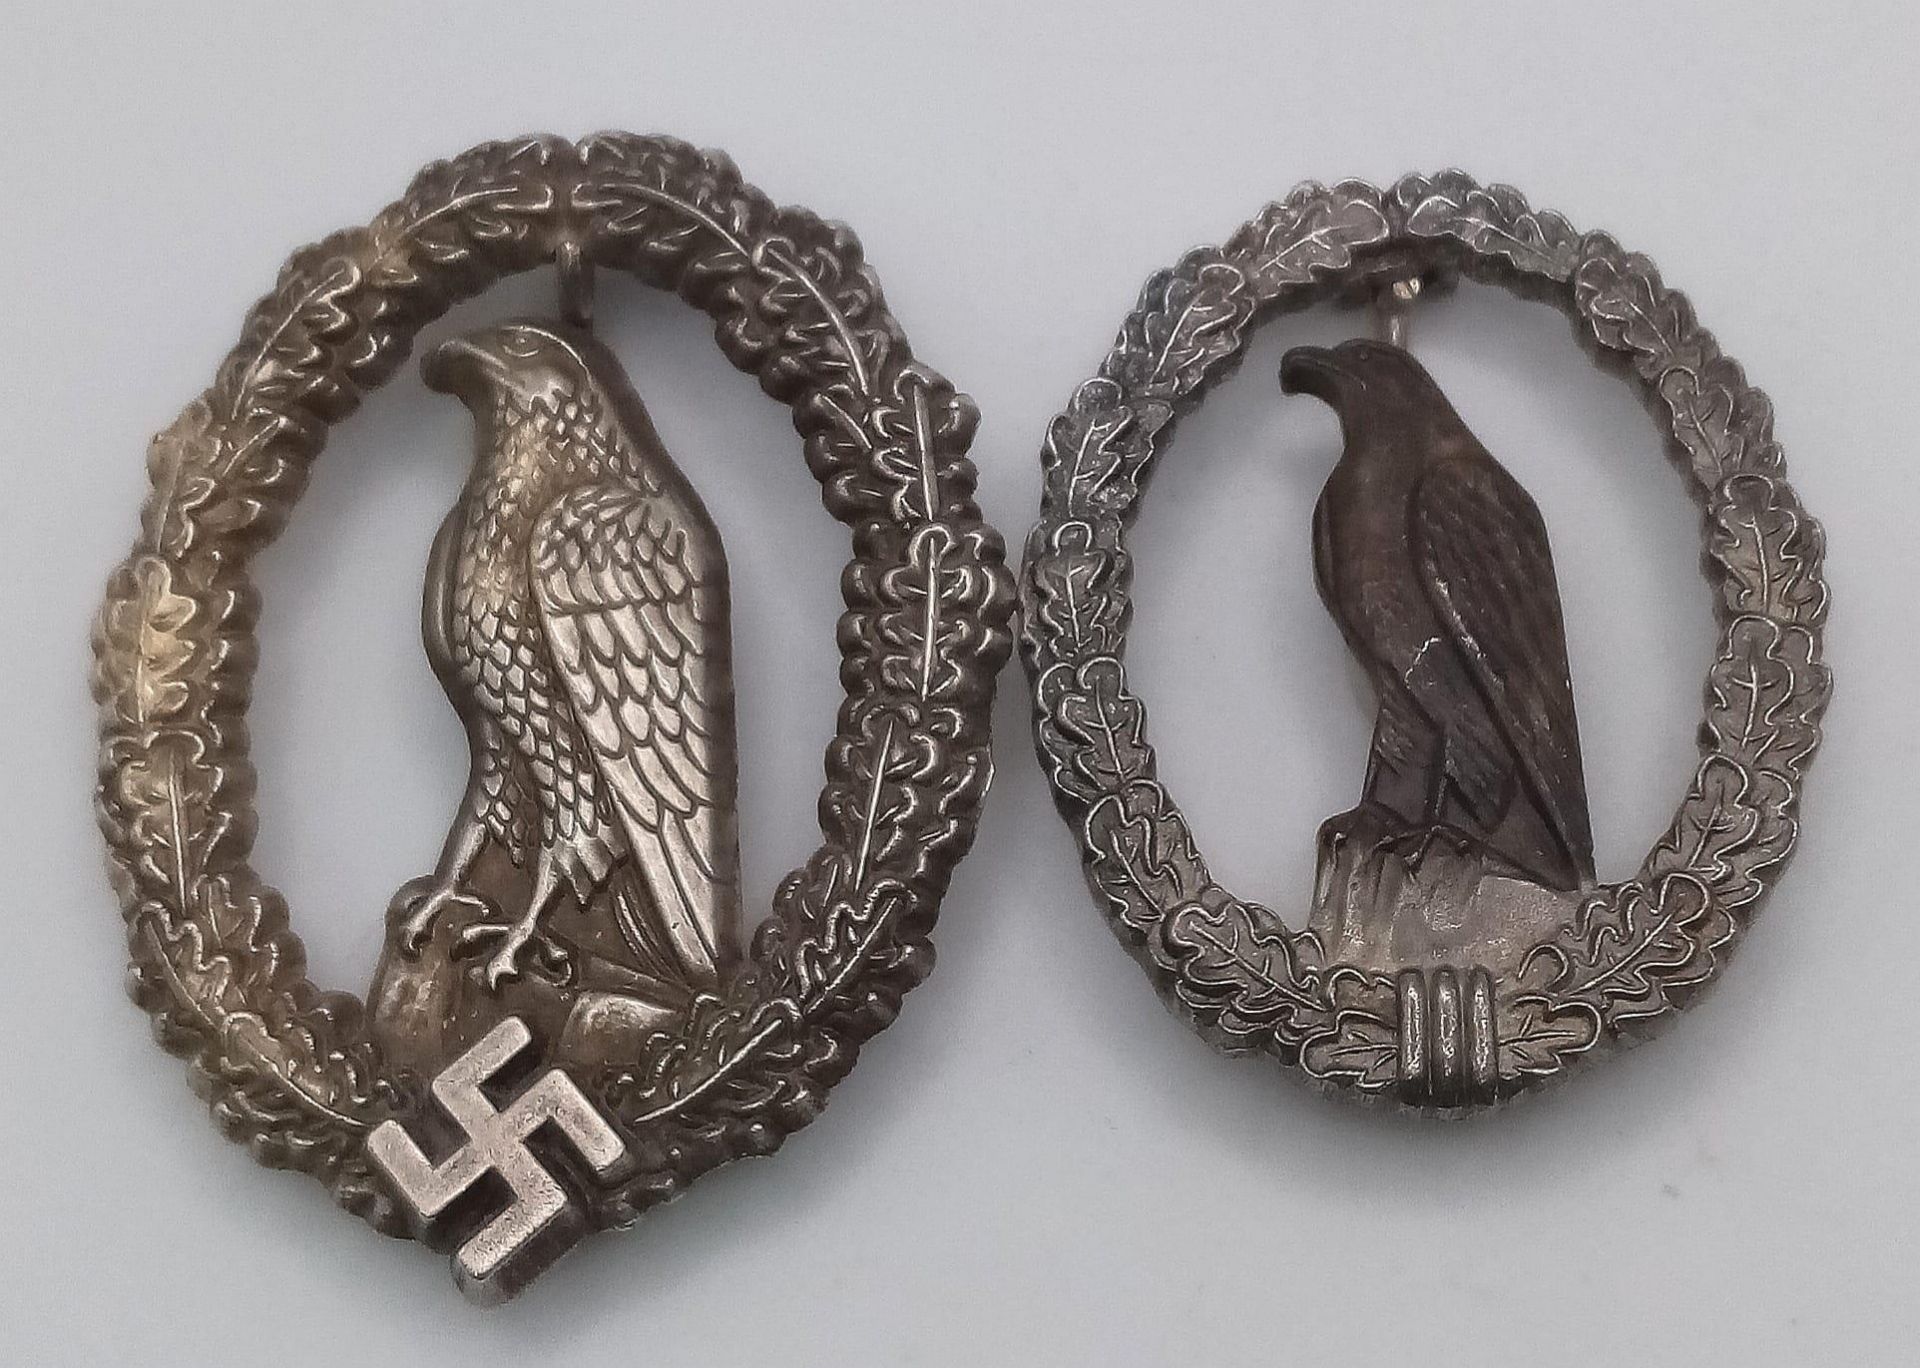 A WW2 German Retired Pilots Badge with a smaller 1957 version without the Swastika, so it could be